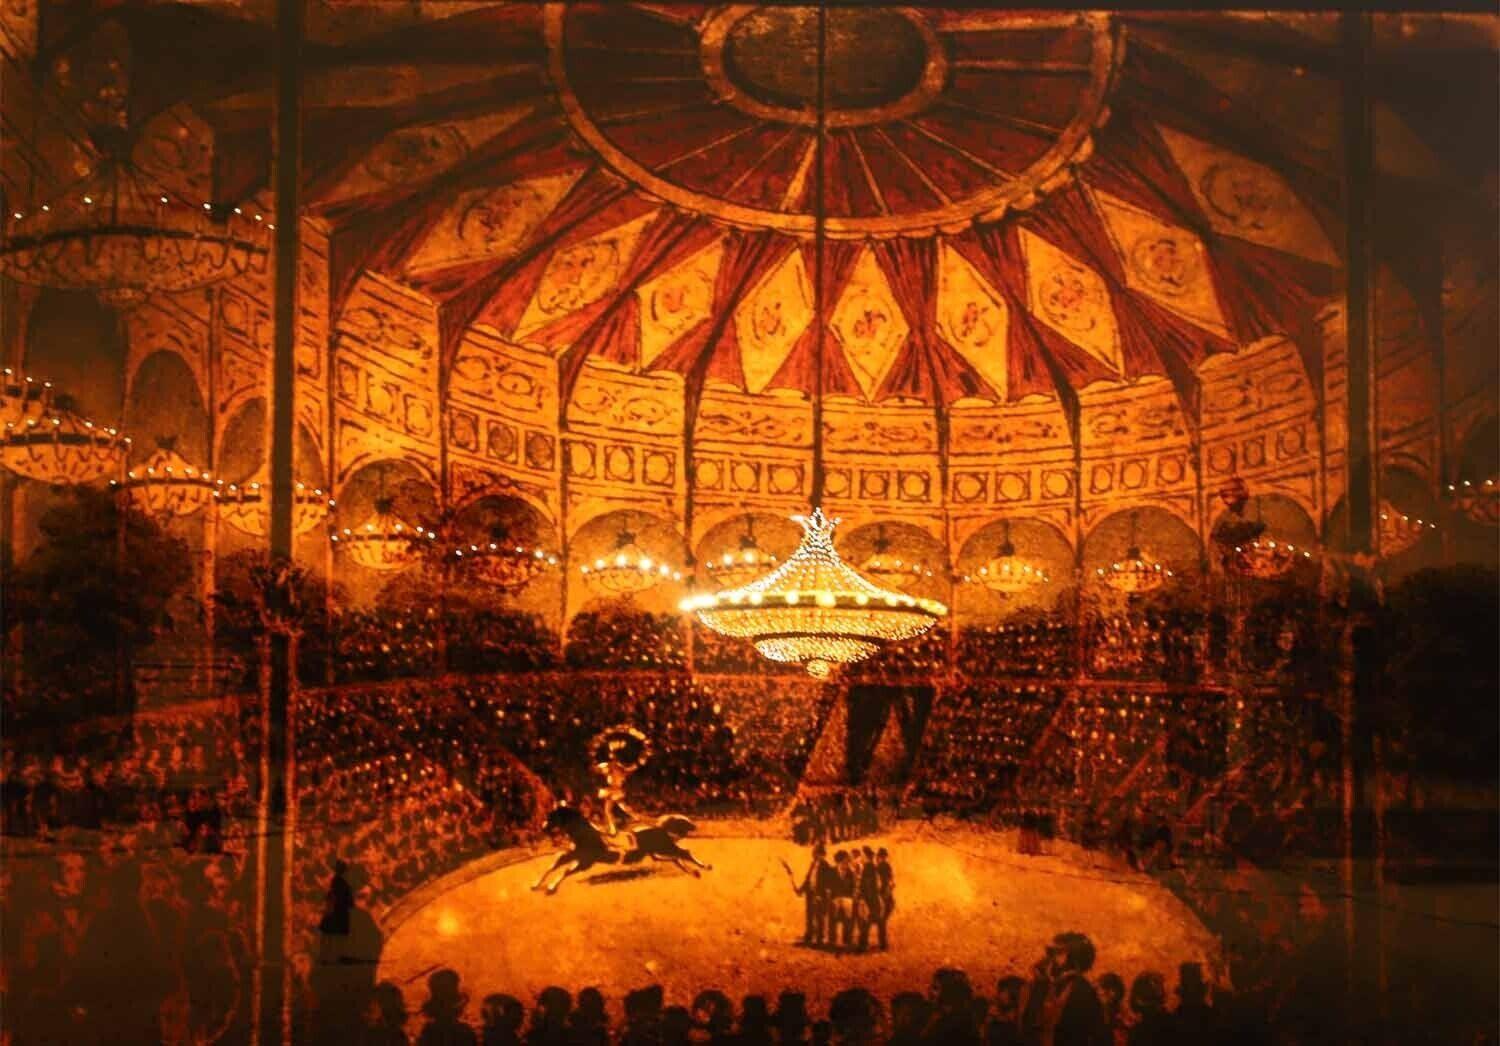 A painting of a circus arena

Description automatically generated